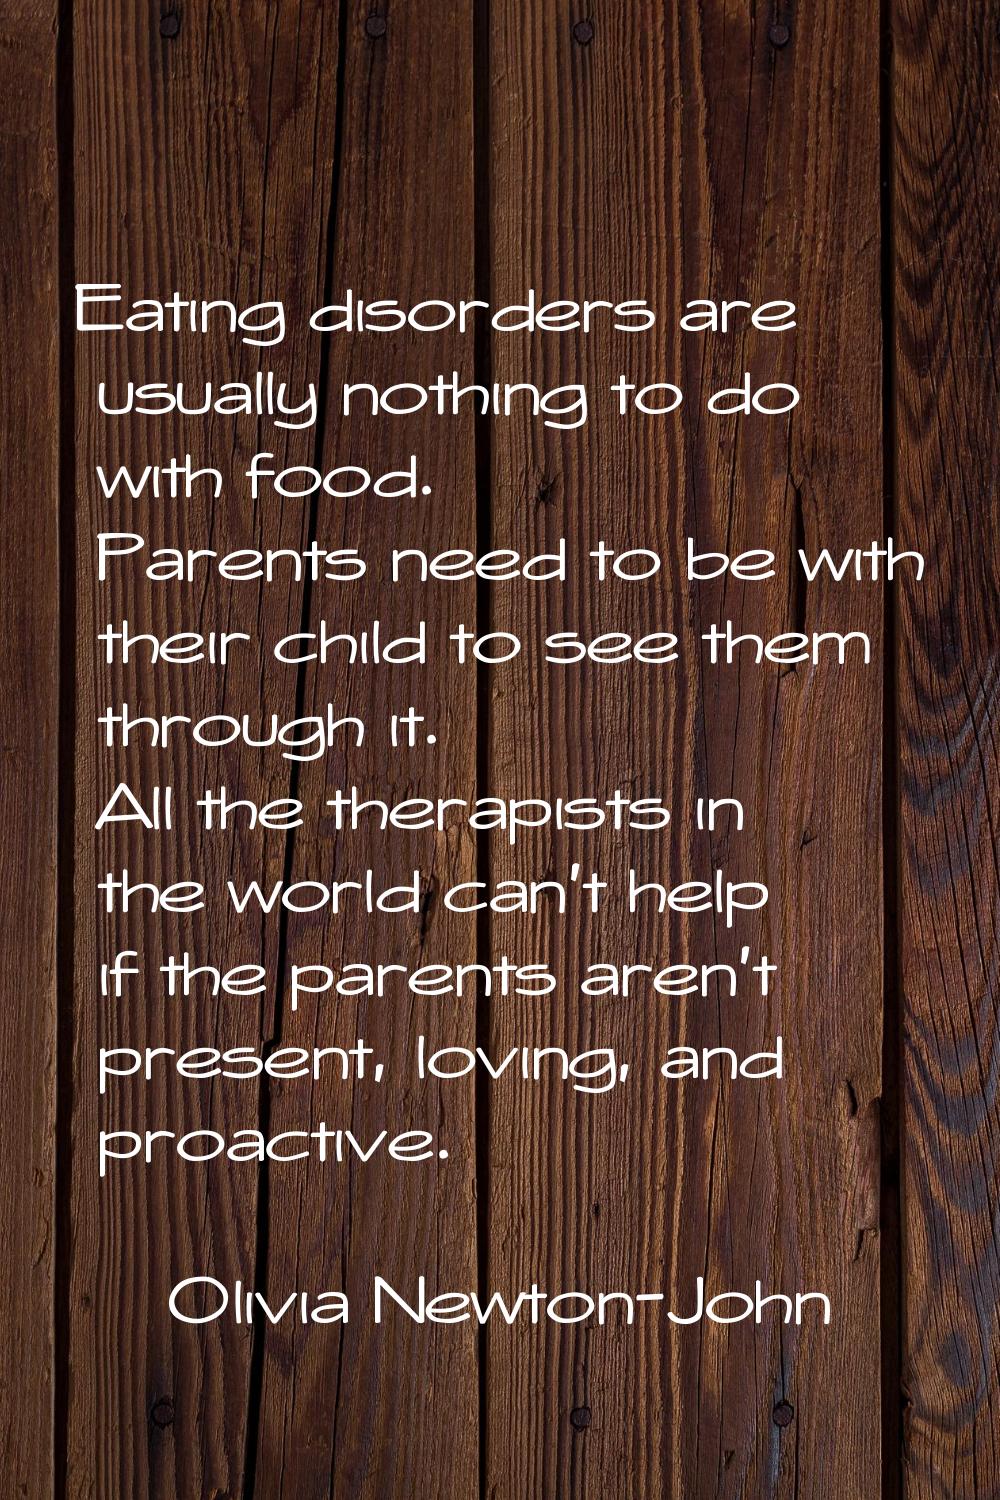 Eating disorders are usually nothing to do with food. Parents need to be with their child to see th